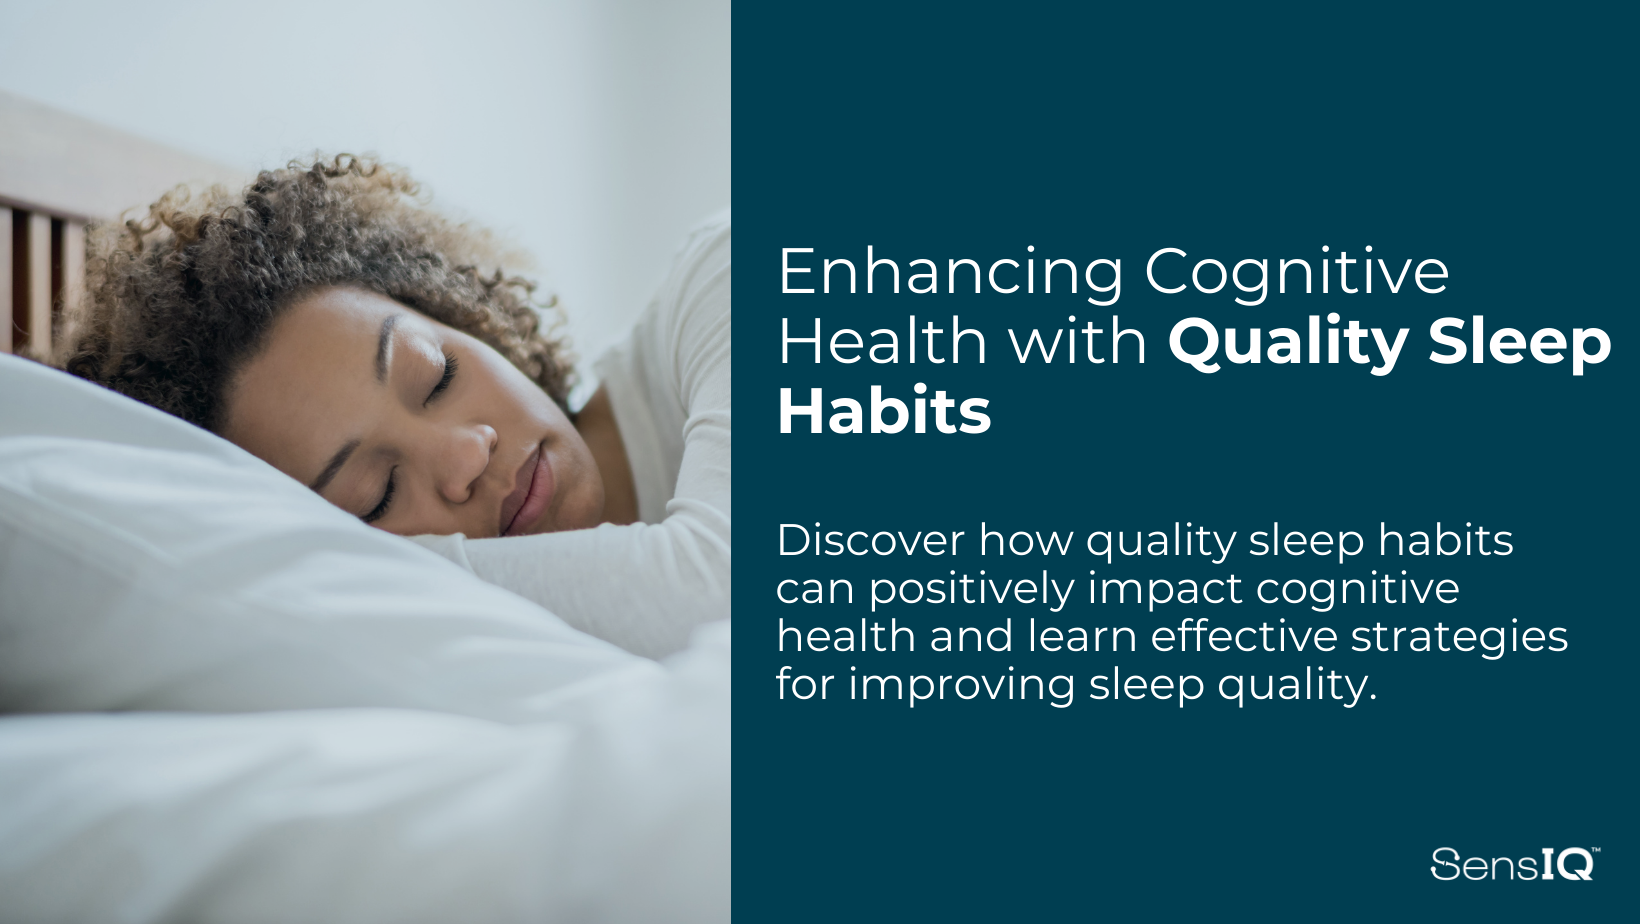 Discover how quality sleep habits can positively impact cognitive health and learn effective strategies for improving sleep quality.